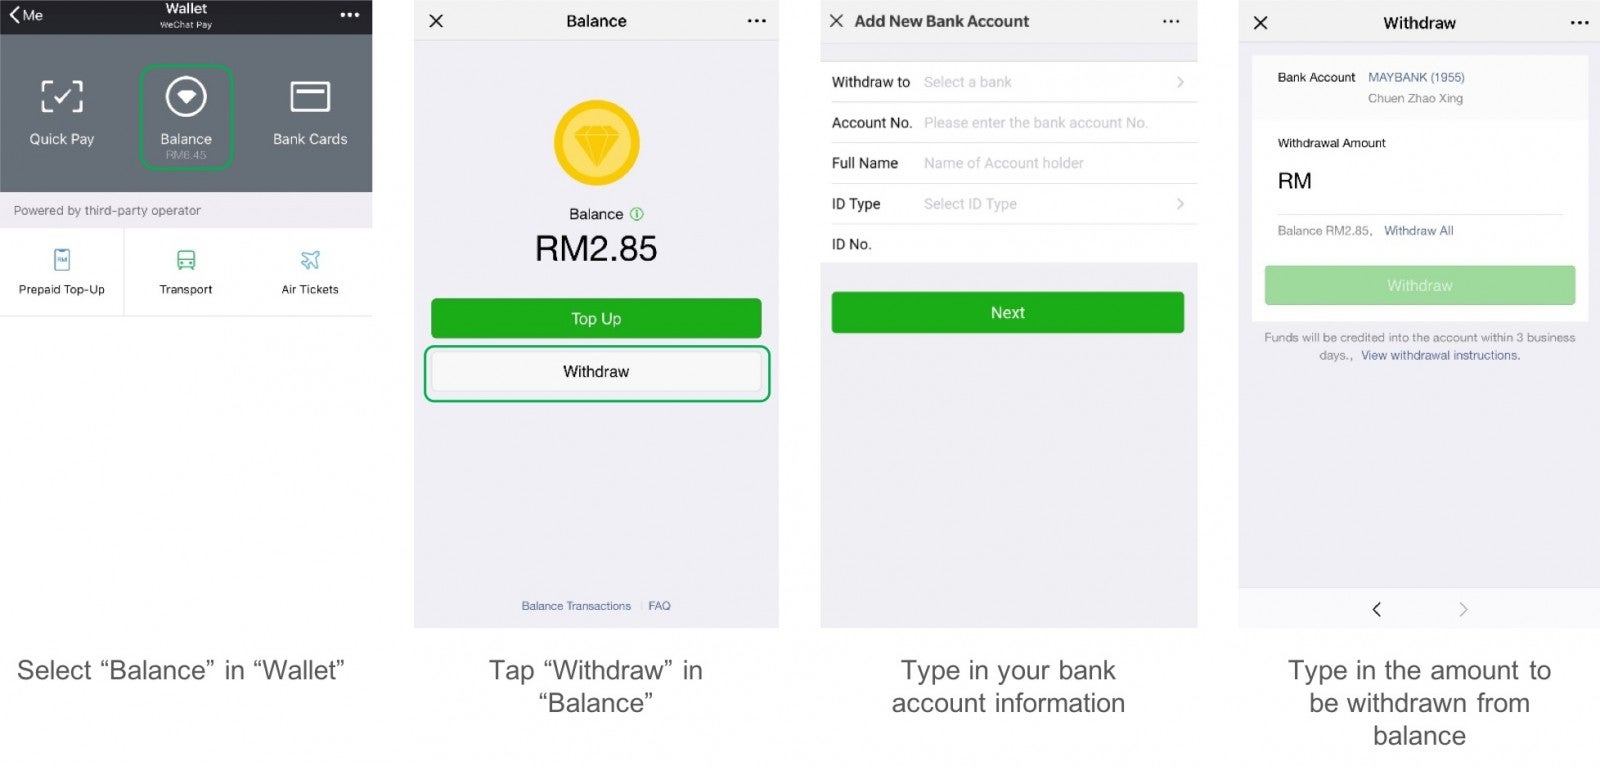 [Test] Here's How M’sians Can Get Up to RM88.88 Free Money by Just Using This ONE App! - WORLD OF BUZZ 7